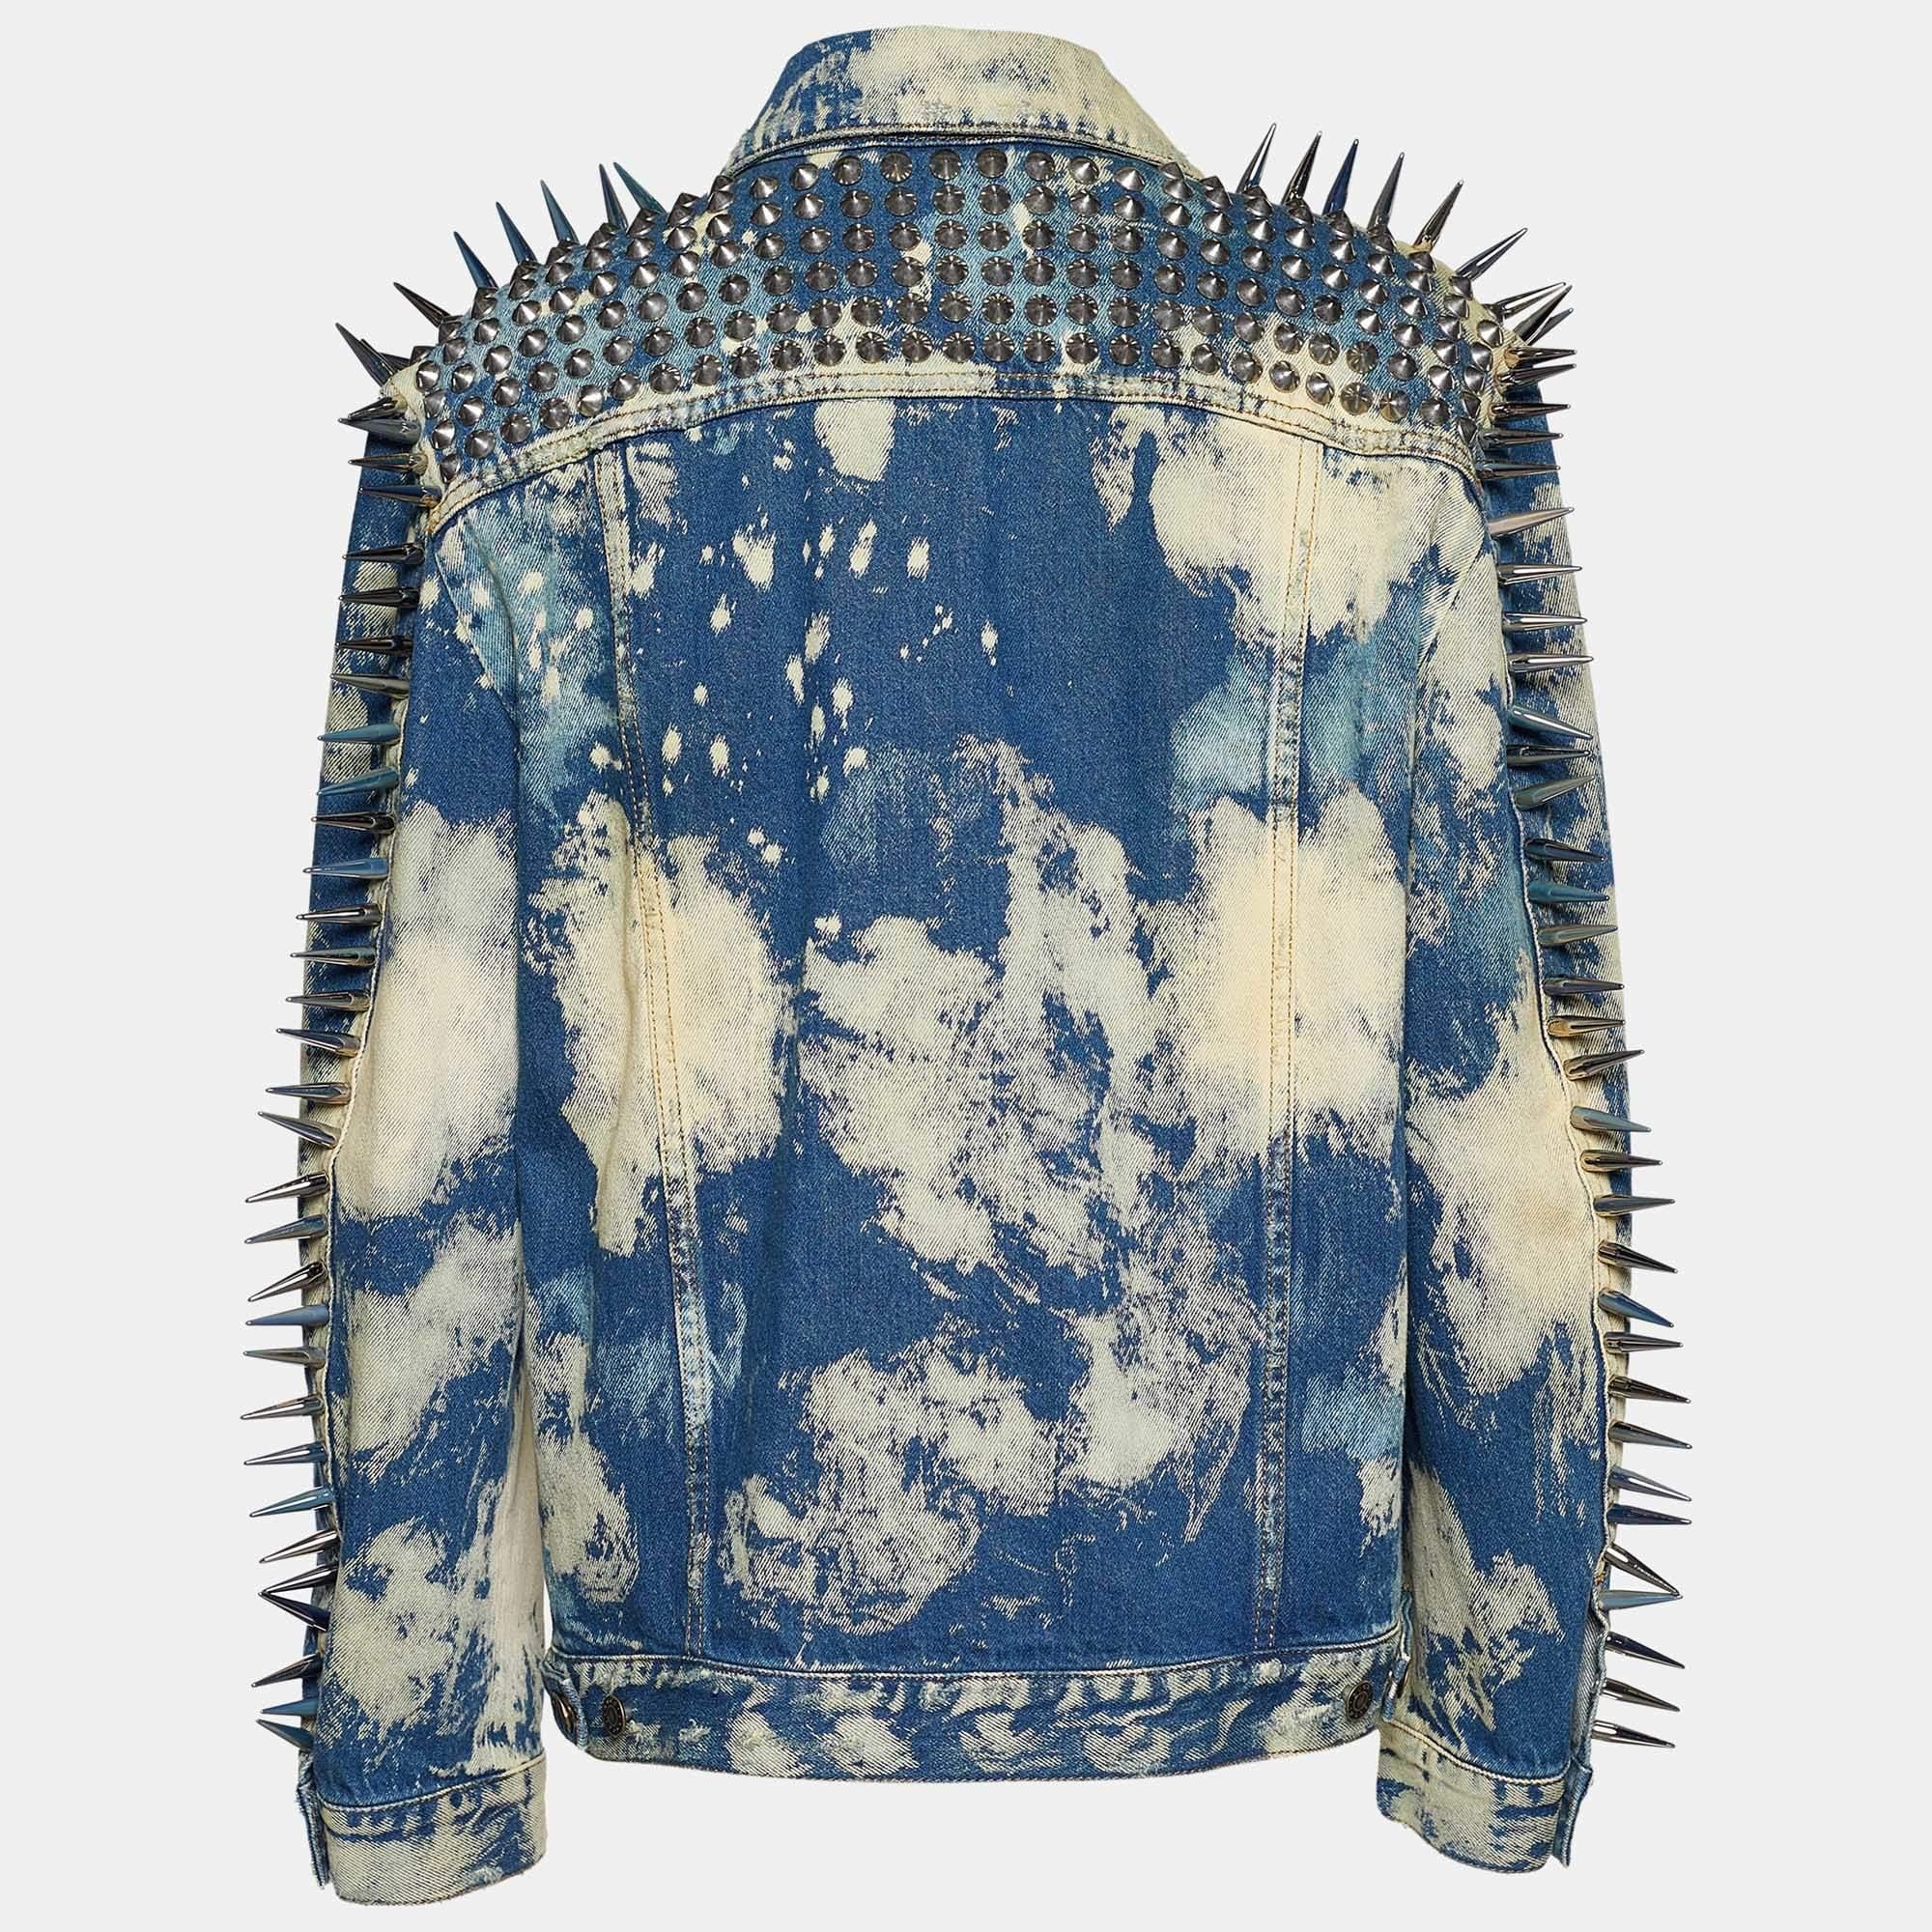 Nail an ultra-cool look with this Gucci denim jacket. Tailored beautifully using acid wash denim, the jacket is added with spiky studs on the yoke and long sleeves. Front button closure and four pockets ensure a practical finish.

Includes: Original